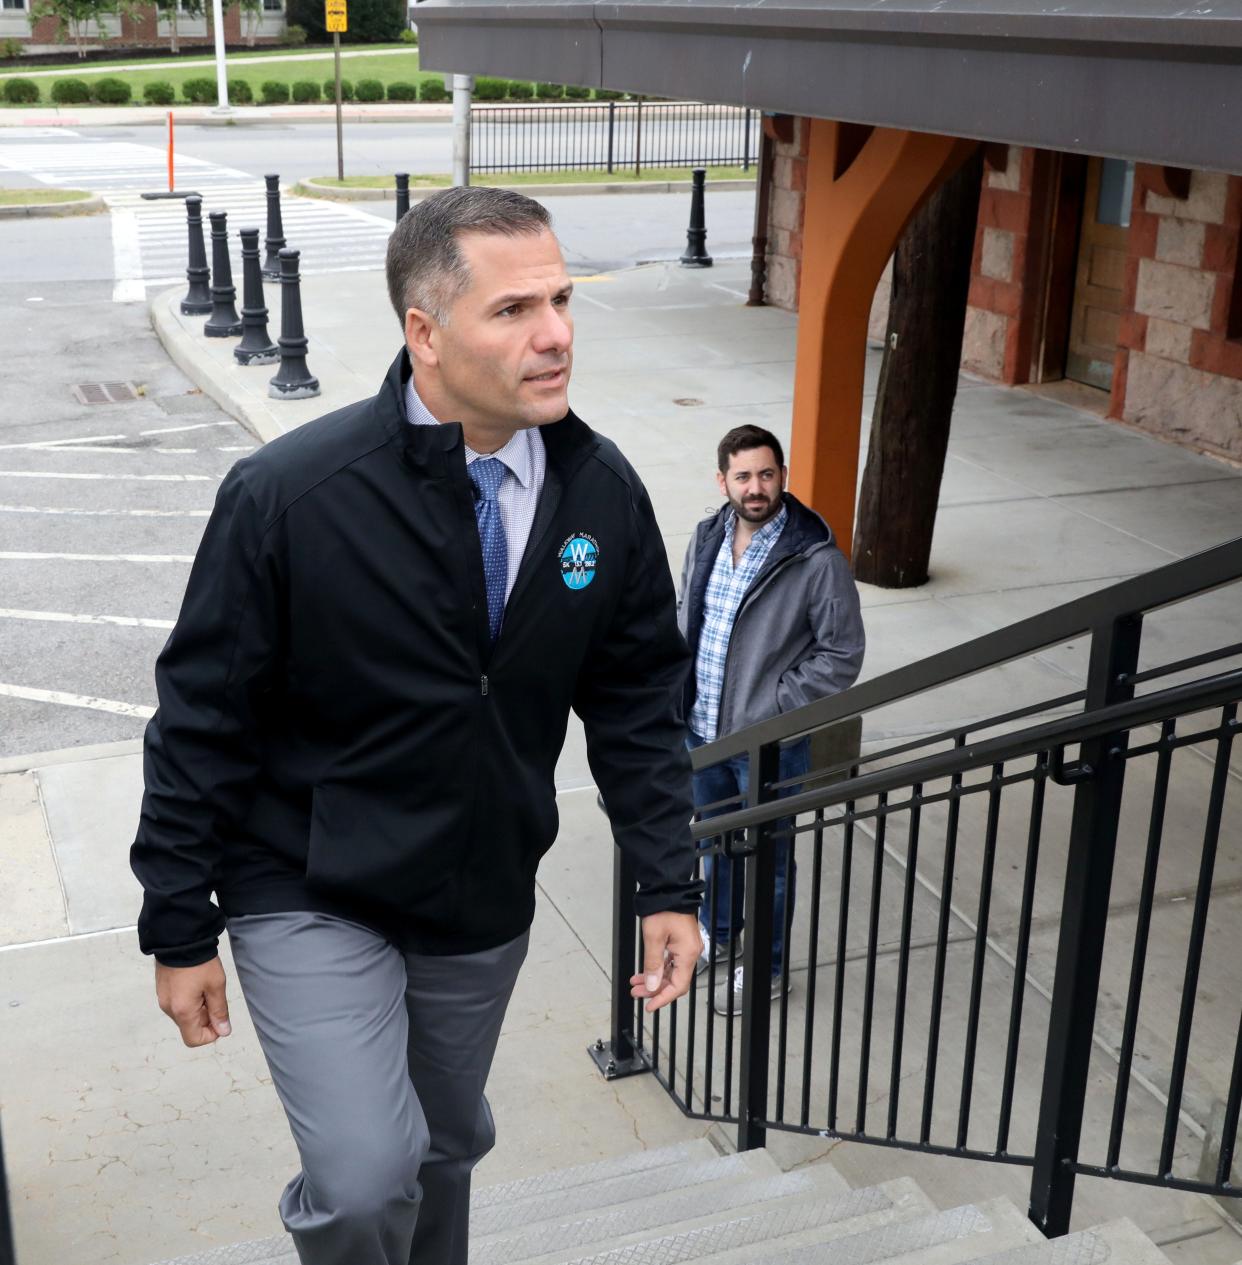 Marc Molinaro, the Dutchess County Executive and a candidate for New York State Governor, arrives at the Tarrytown train station for a press conference, Sept. 9, 2018. 